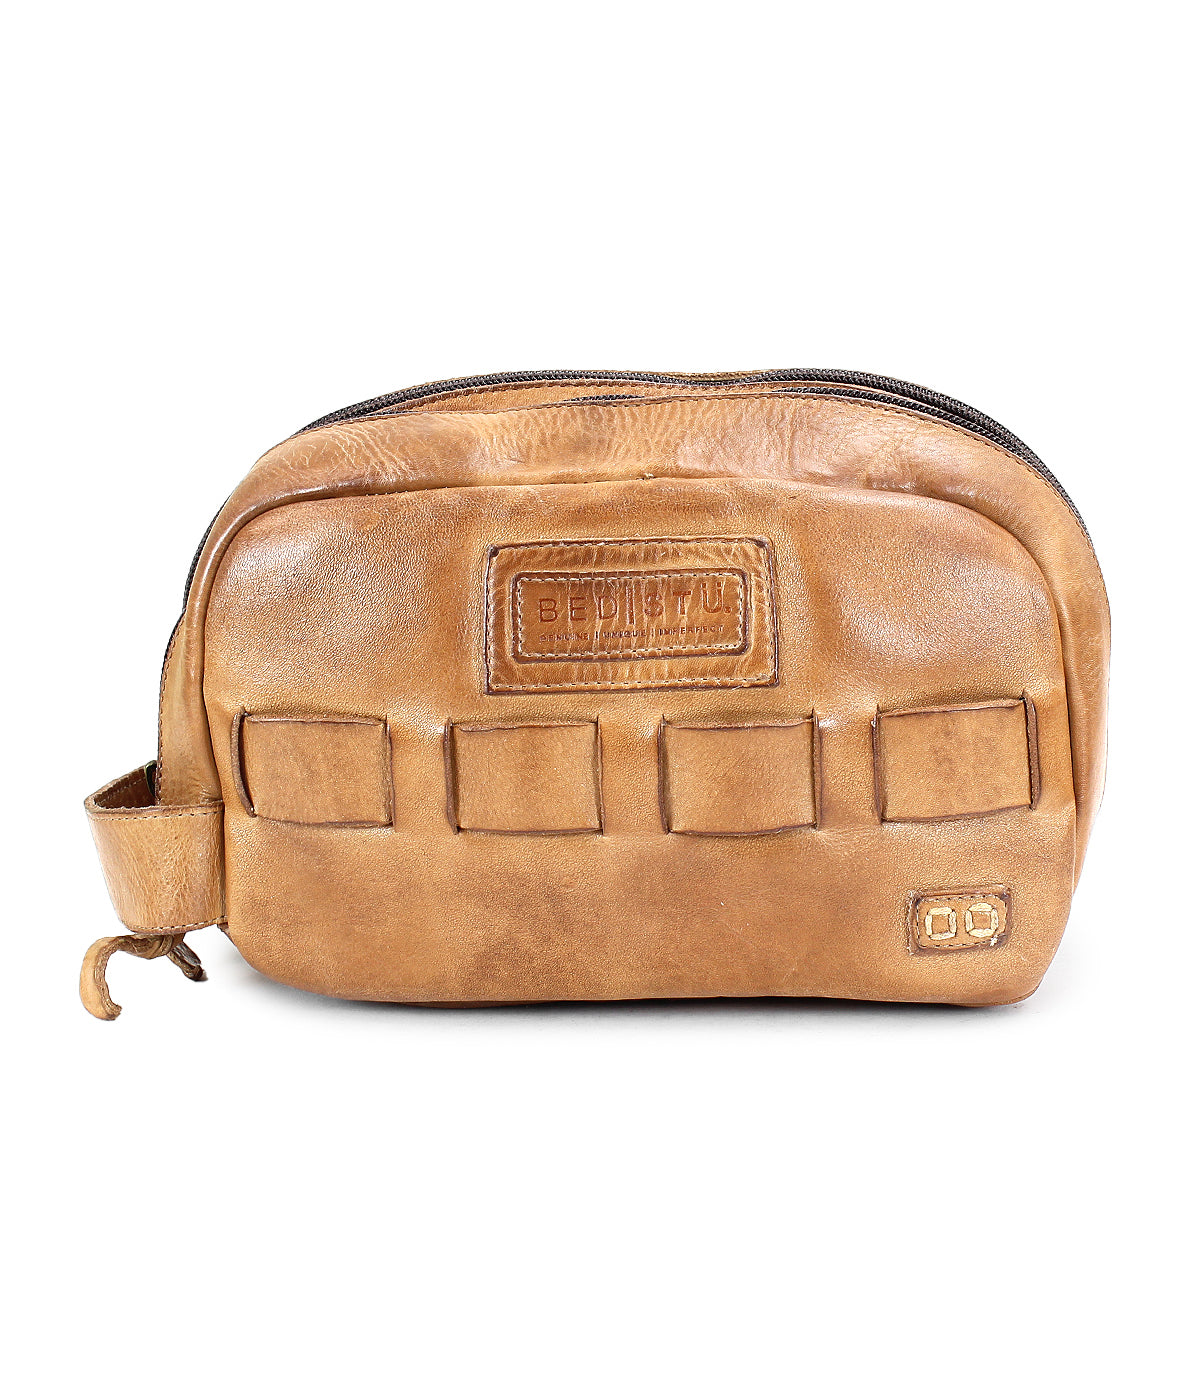 A brown leather dopp kit called Kip with a zipper closure, multiple exterior pockets, and a small handle on the side. This travel essential from Bed Stu is made of vegetable tanned leather for durability and style.